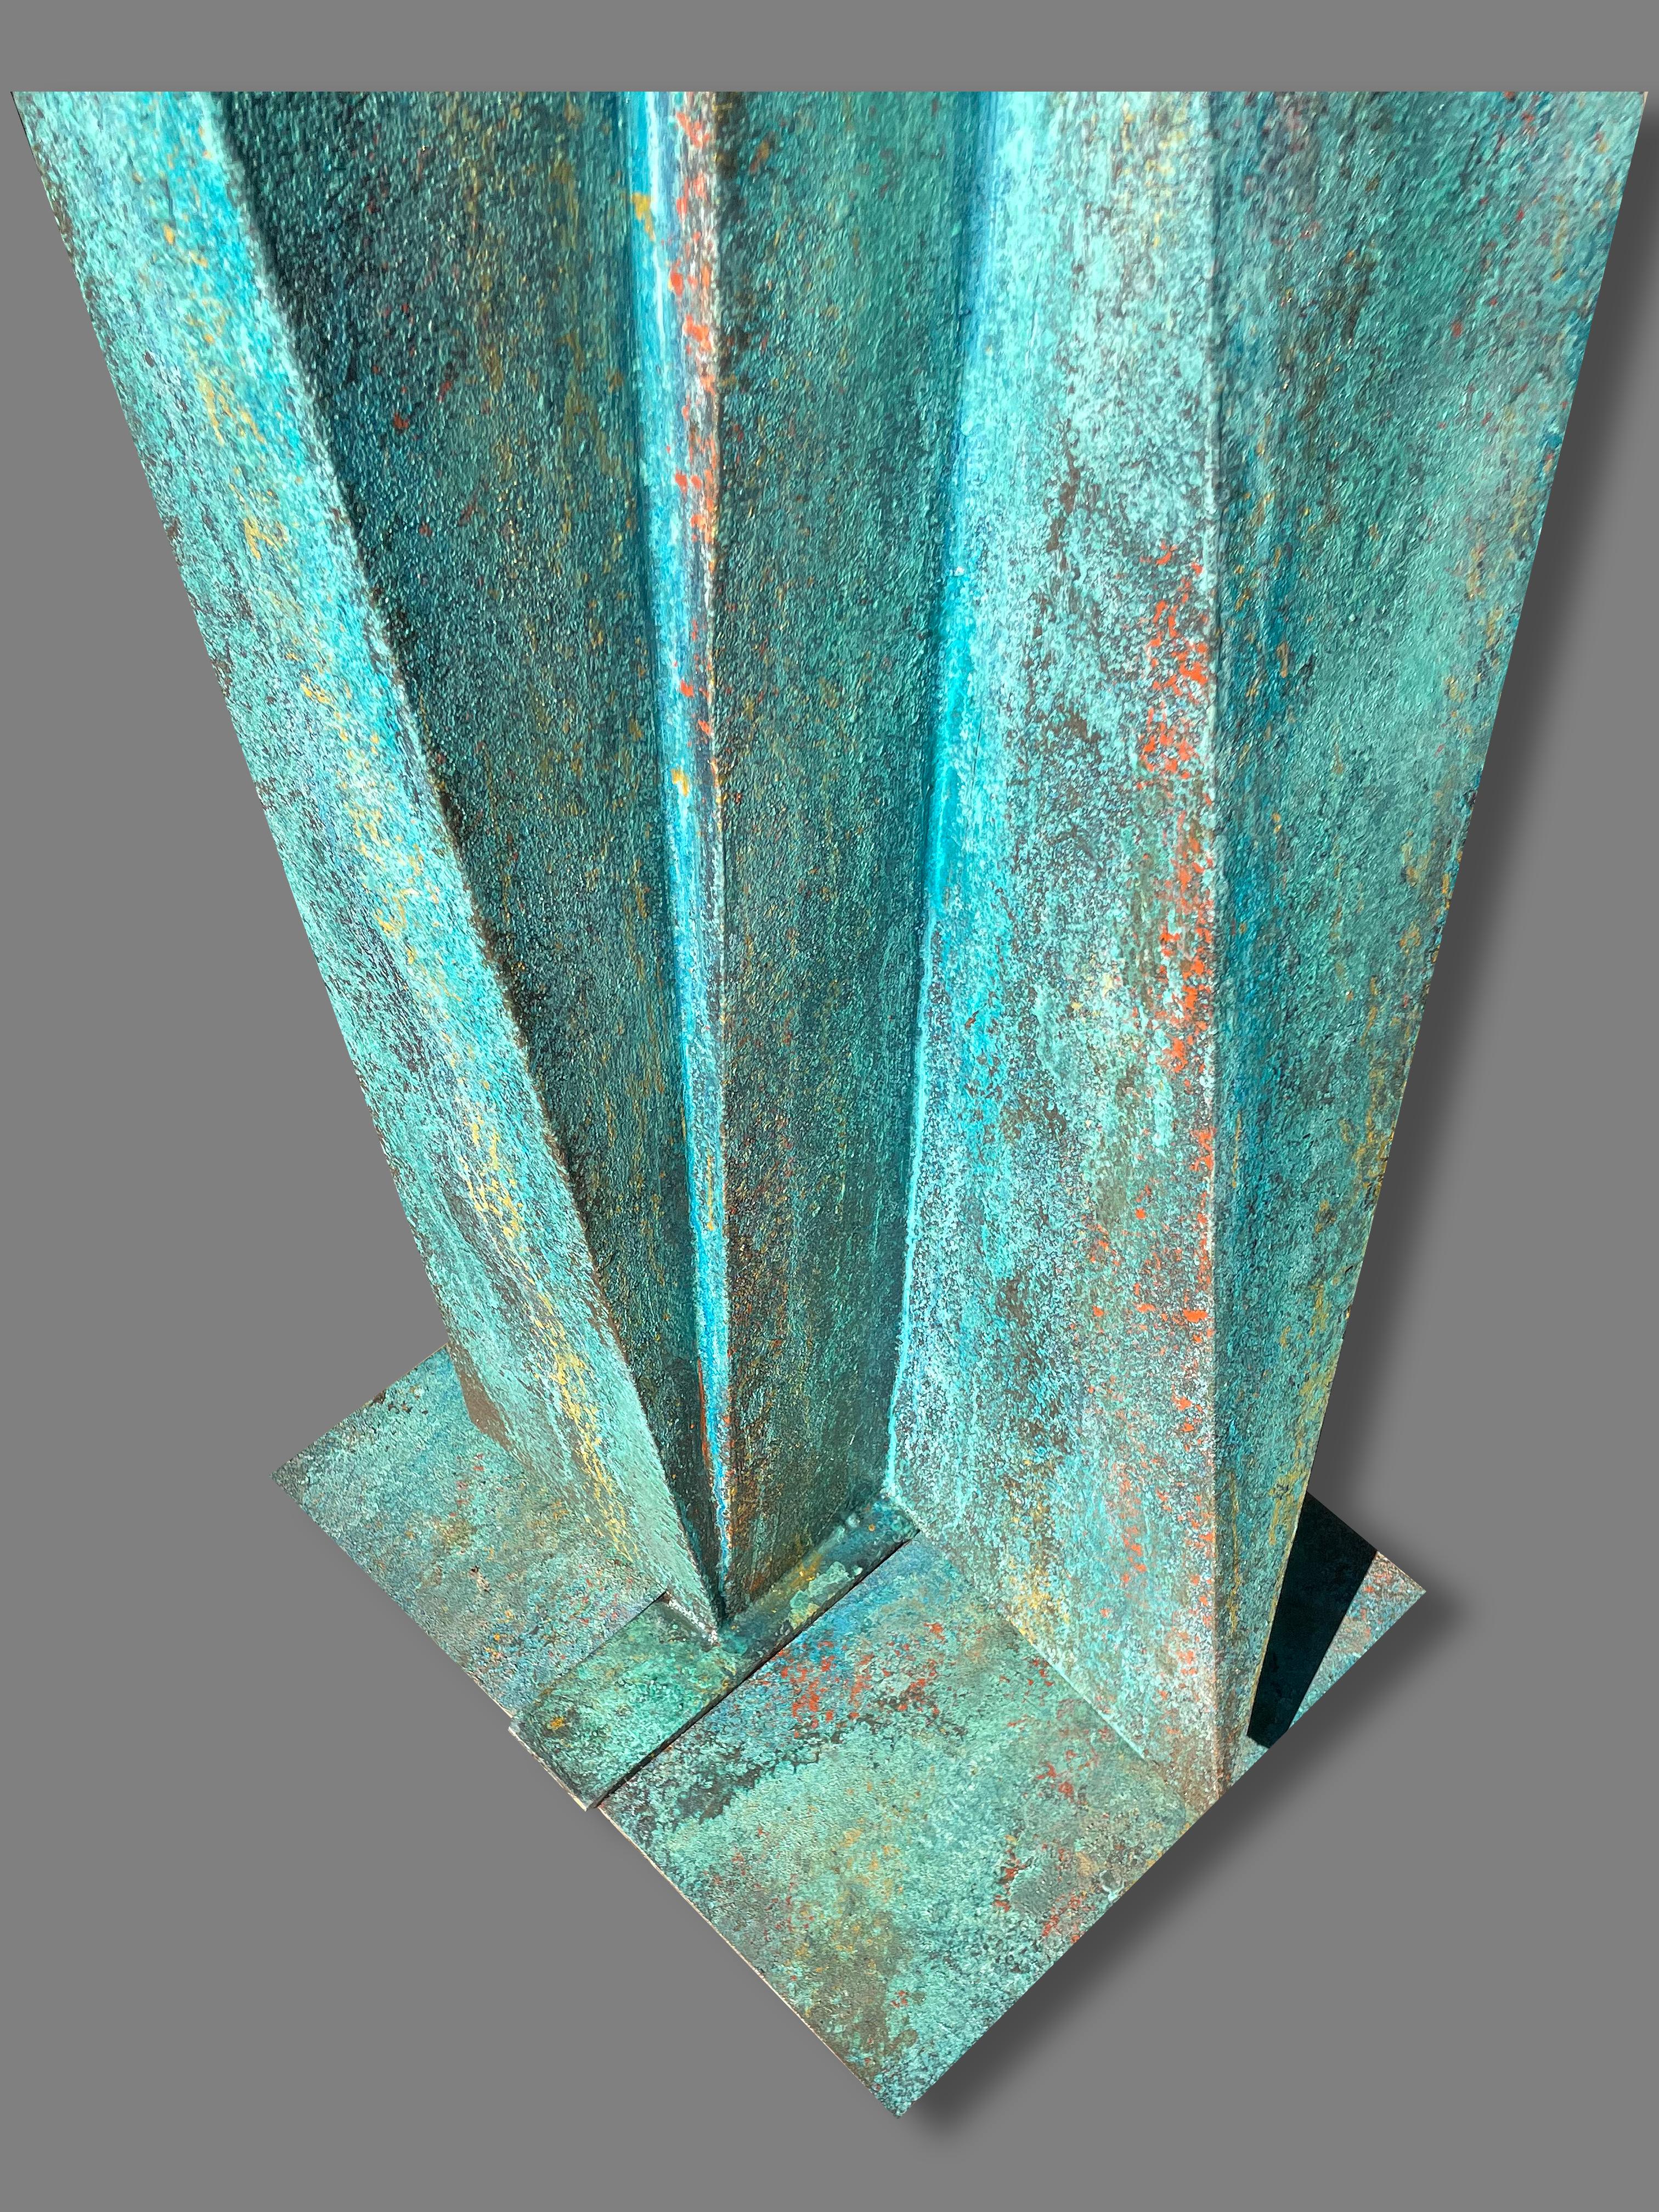 Rising Wisdom Tower - Black Abstract Sculpture by Charles Sherman